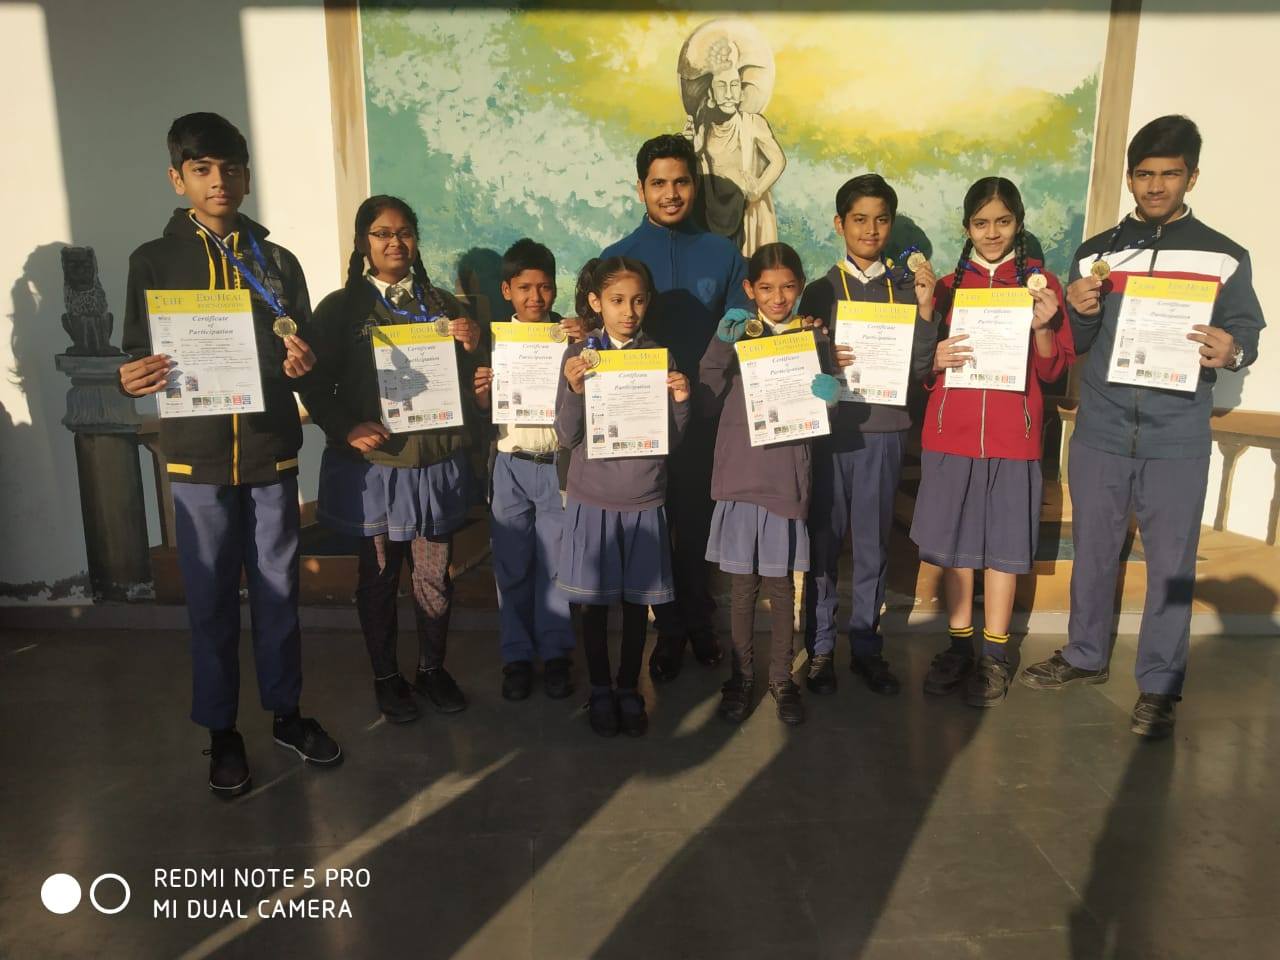 Gold Medal Distribution of Olympiad Art Exam 2018